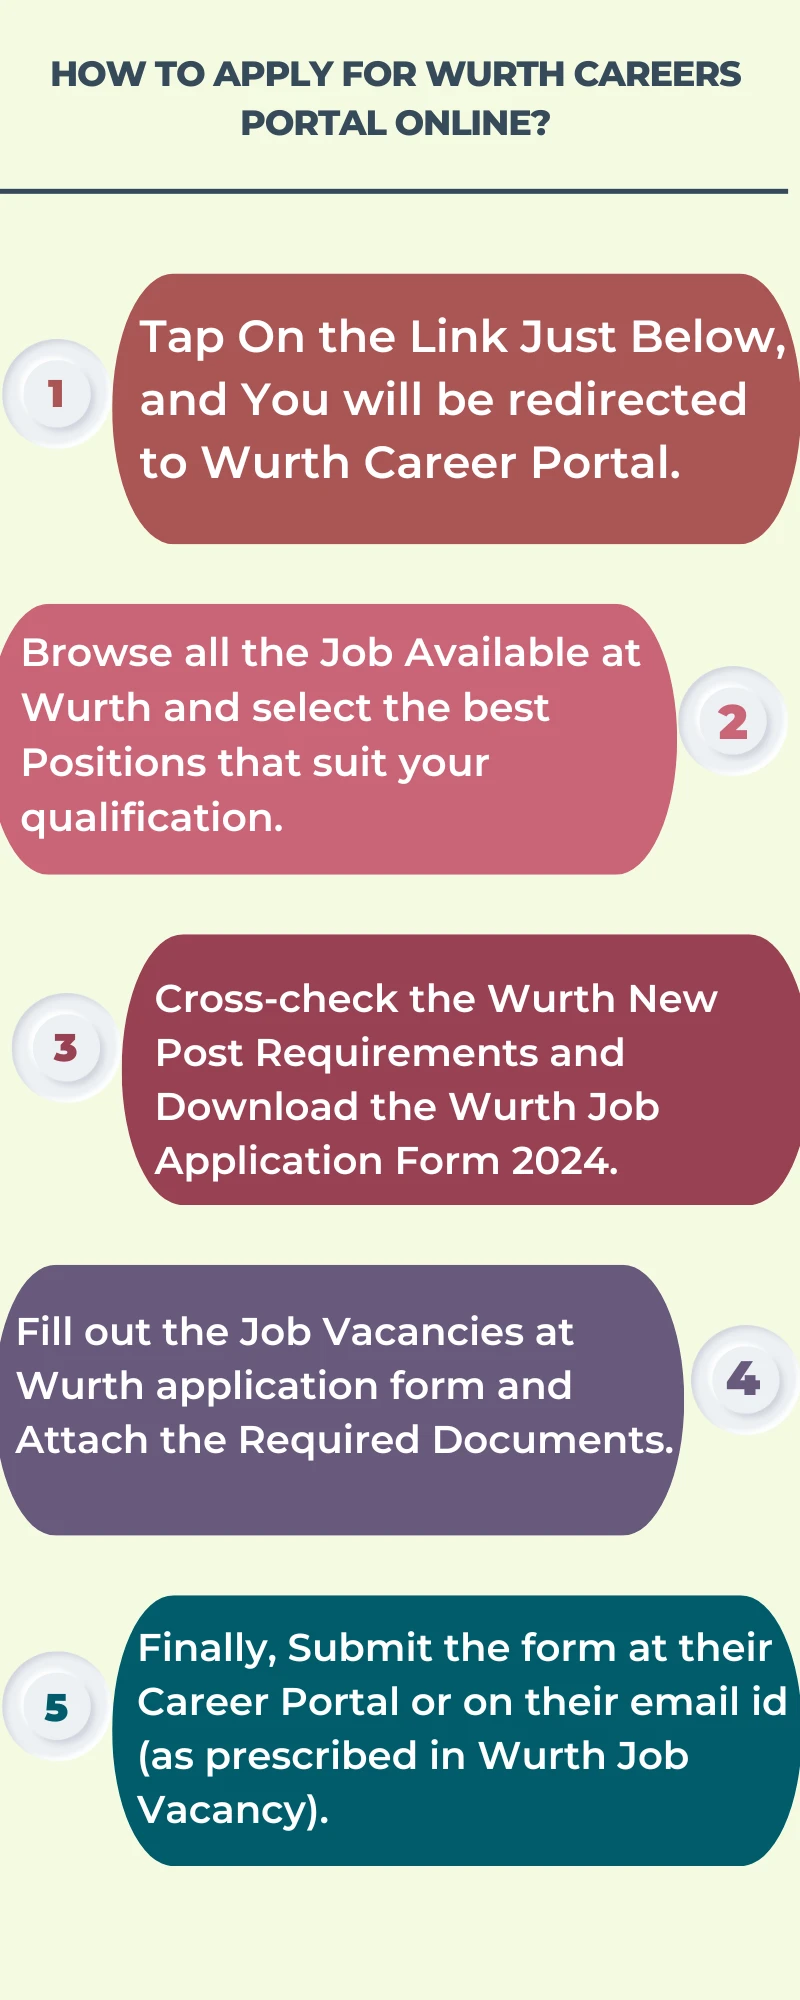 How To Apply for Wurth Careers Portal Online?